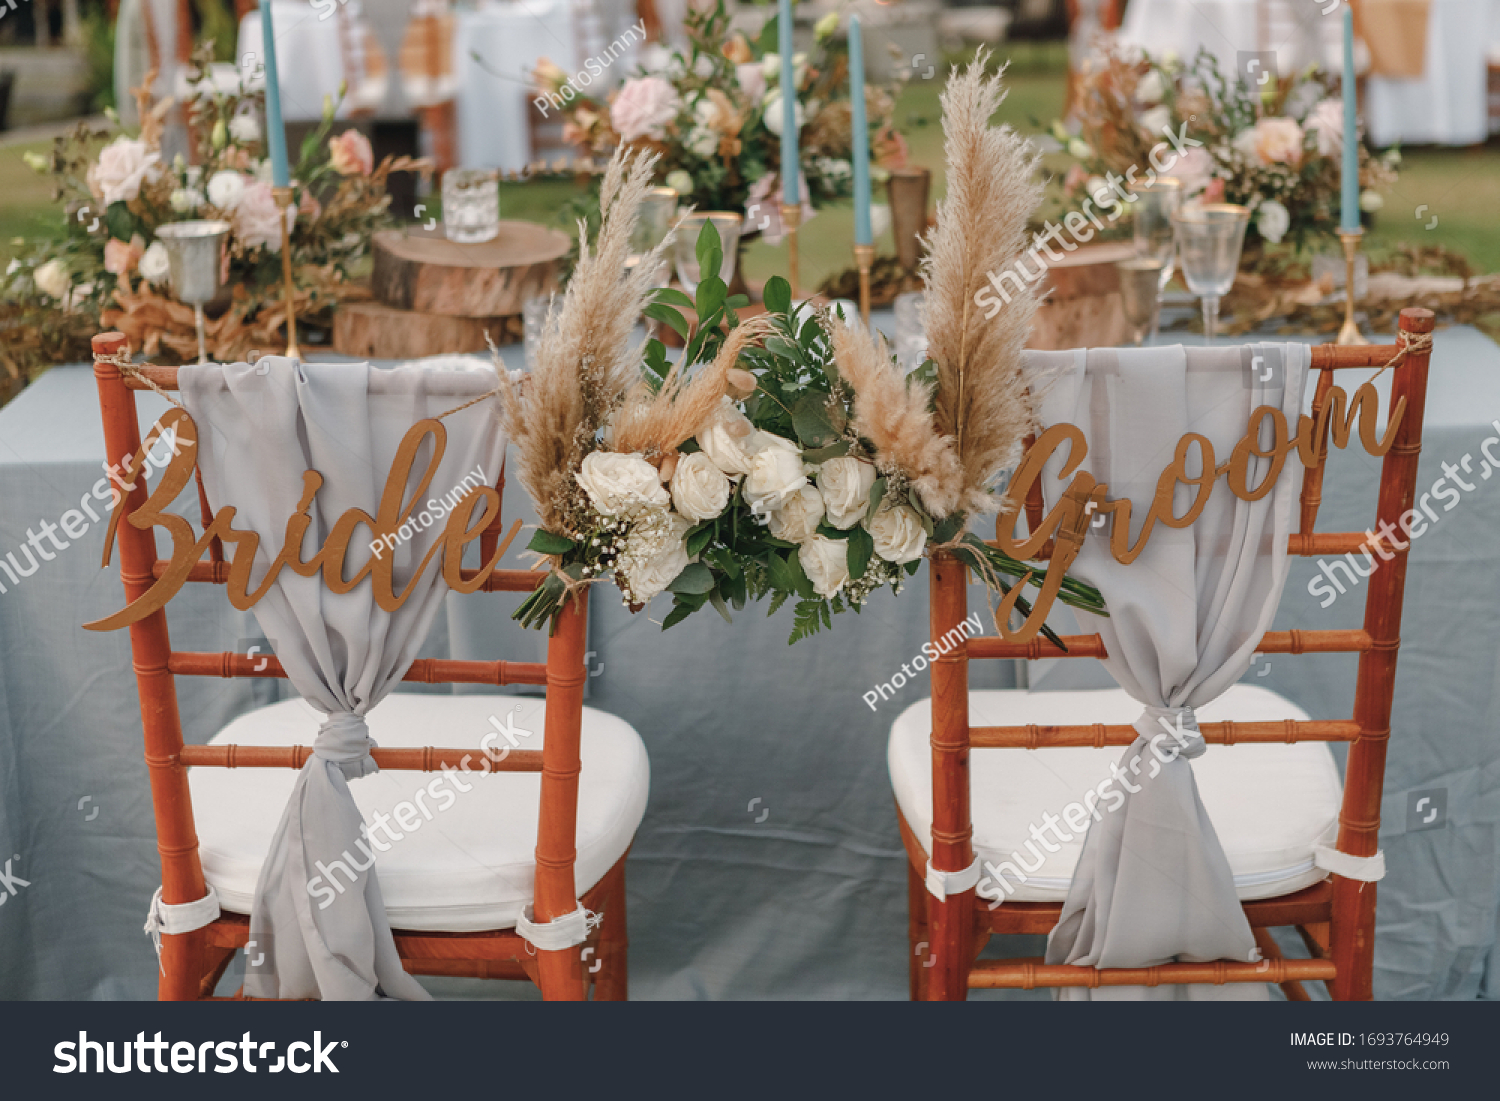 Two chairs assigned to the bride and groom at a wedding setting. Bride and groom. Wedding bride and groom Signs on chairs standing in the woods. #1693764949